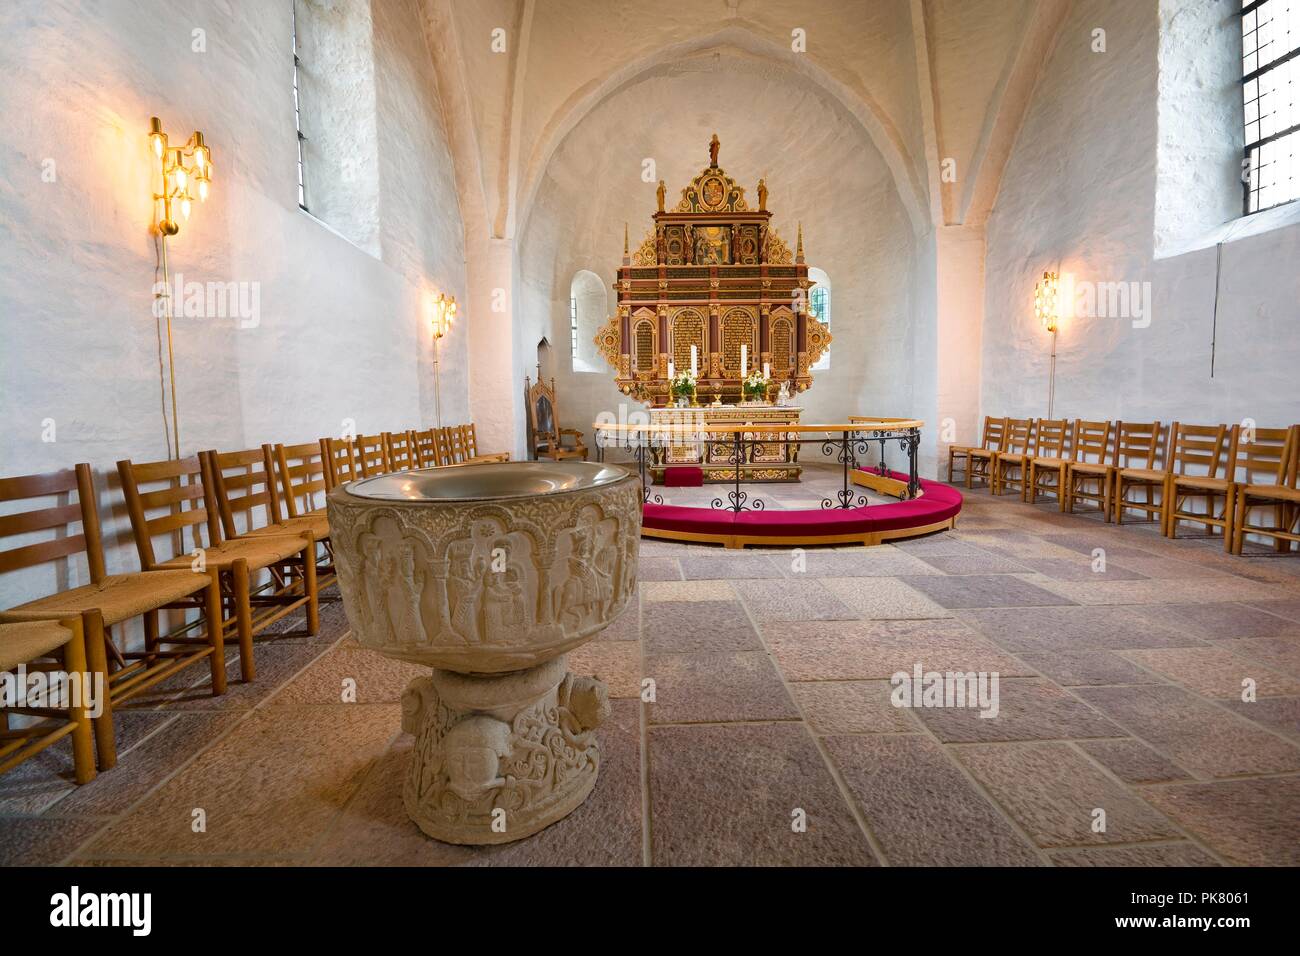 AAKIRKEBY, DENMARK - AUGUST 19, 2018: Interior of Aa church. It is the biggest and oldest church on the Bornholm island. Well known for ornamented fon Stock Photo